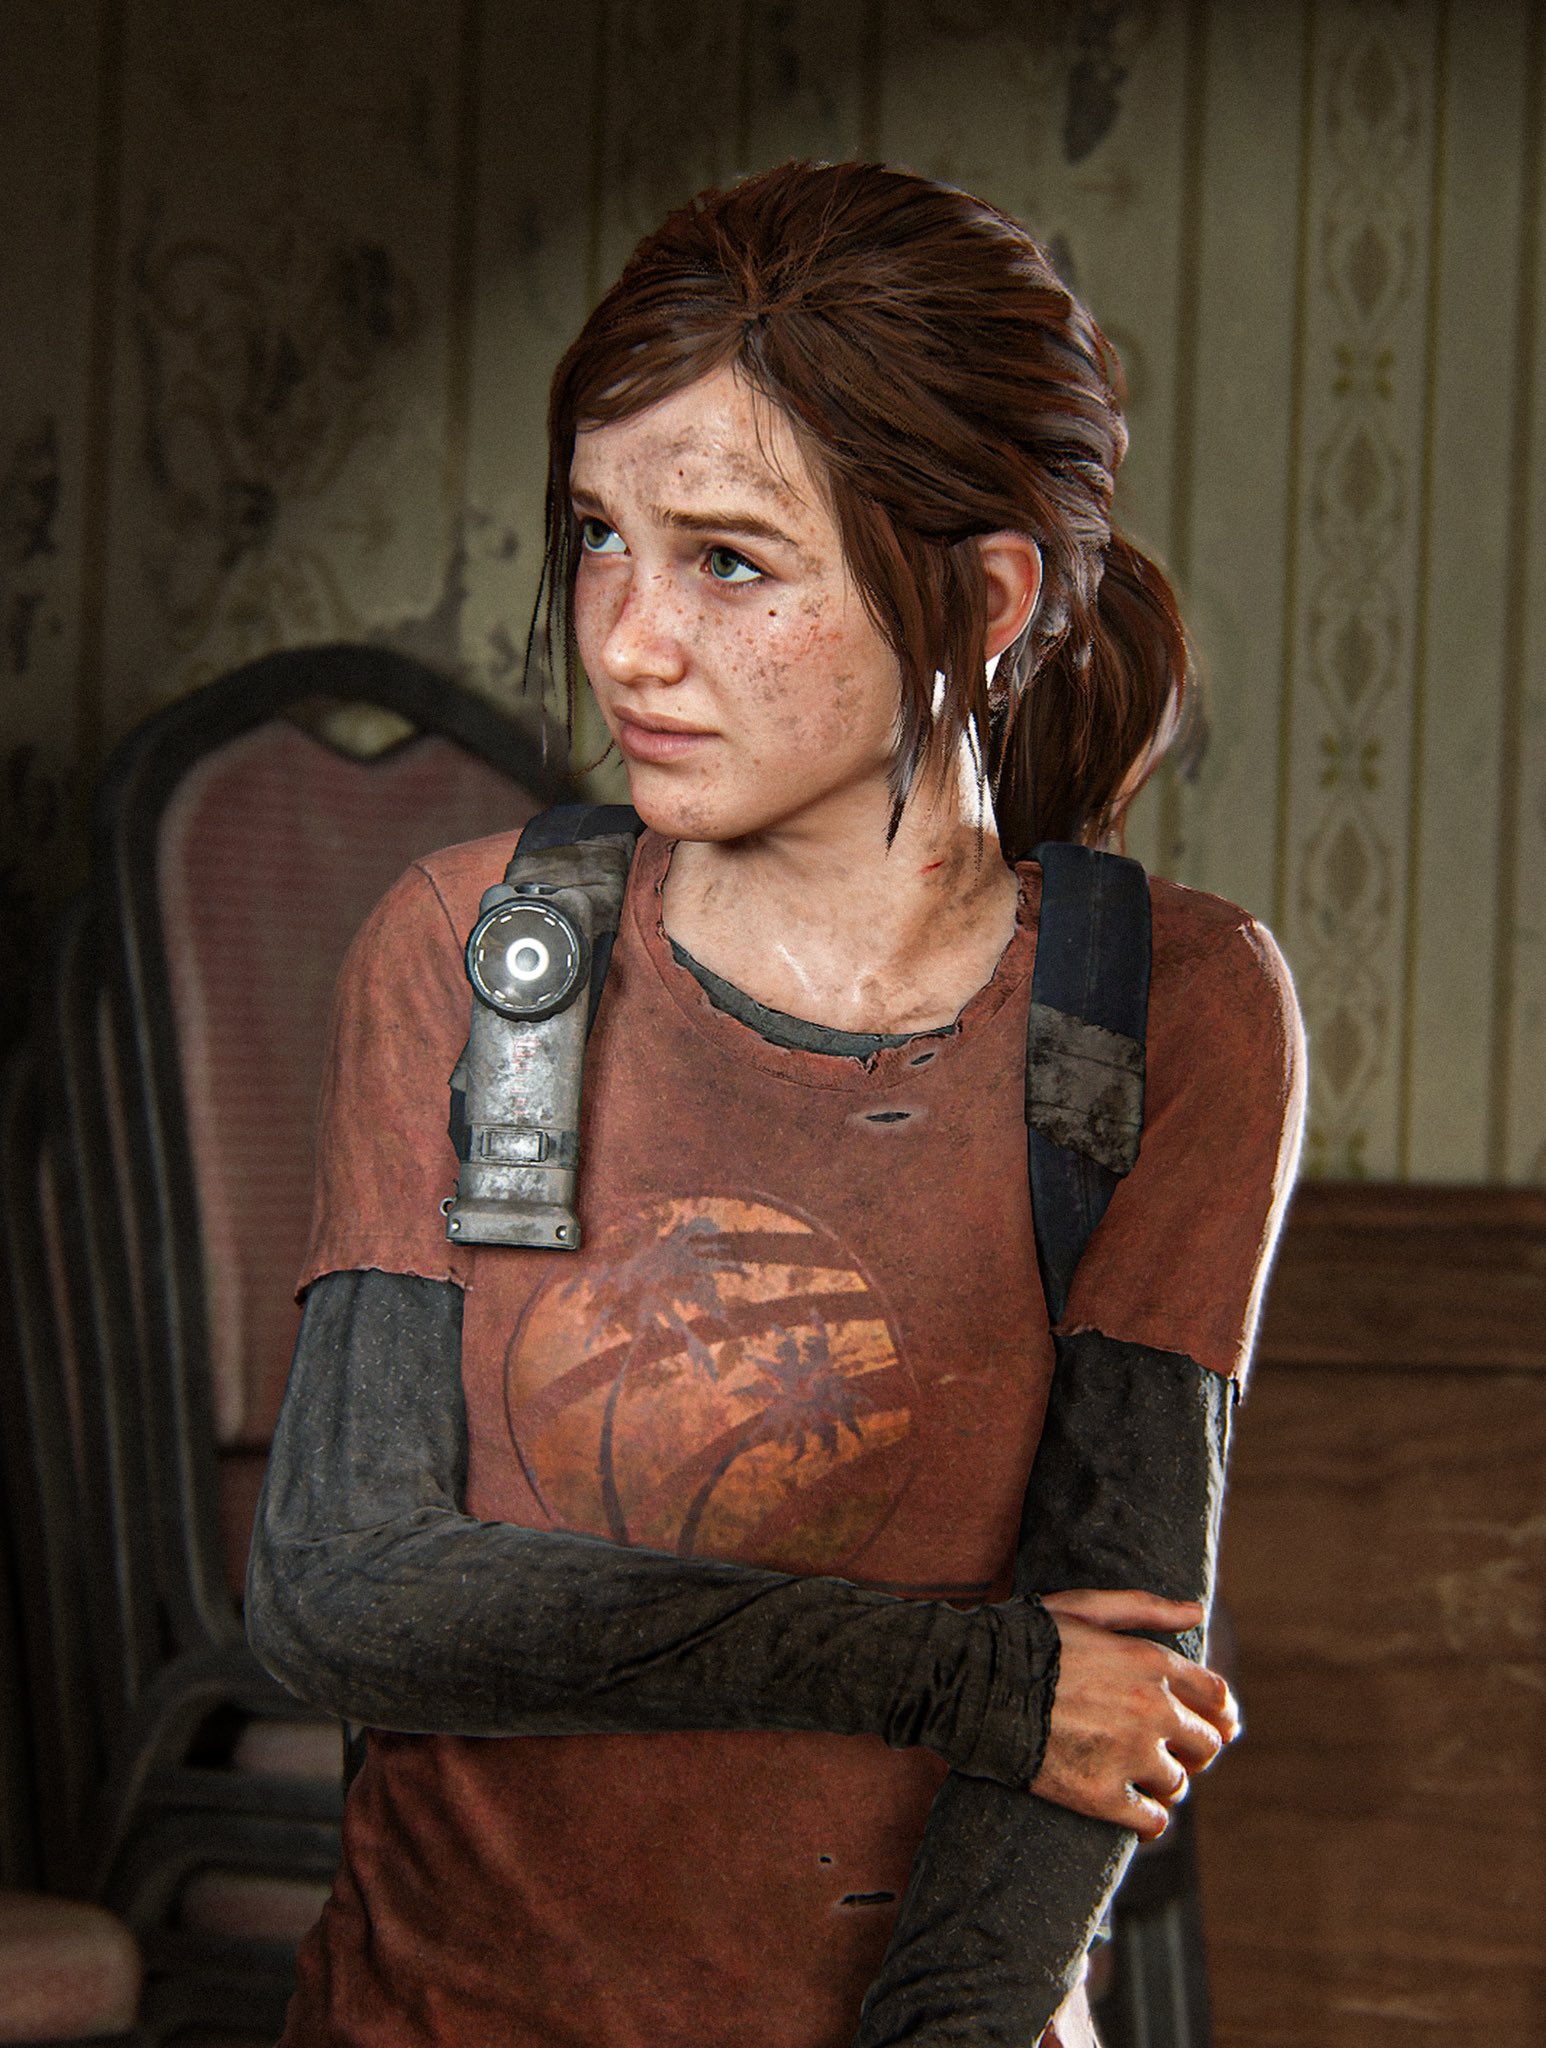 The Last Of Us Ellie Williams PlayStation Playstation 5 Video Games Video Game Characters Sony Naugh 1546x2048